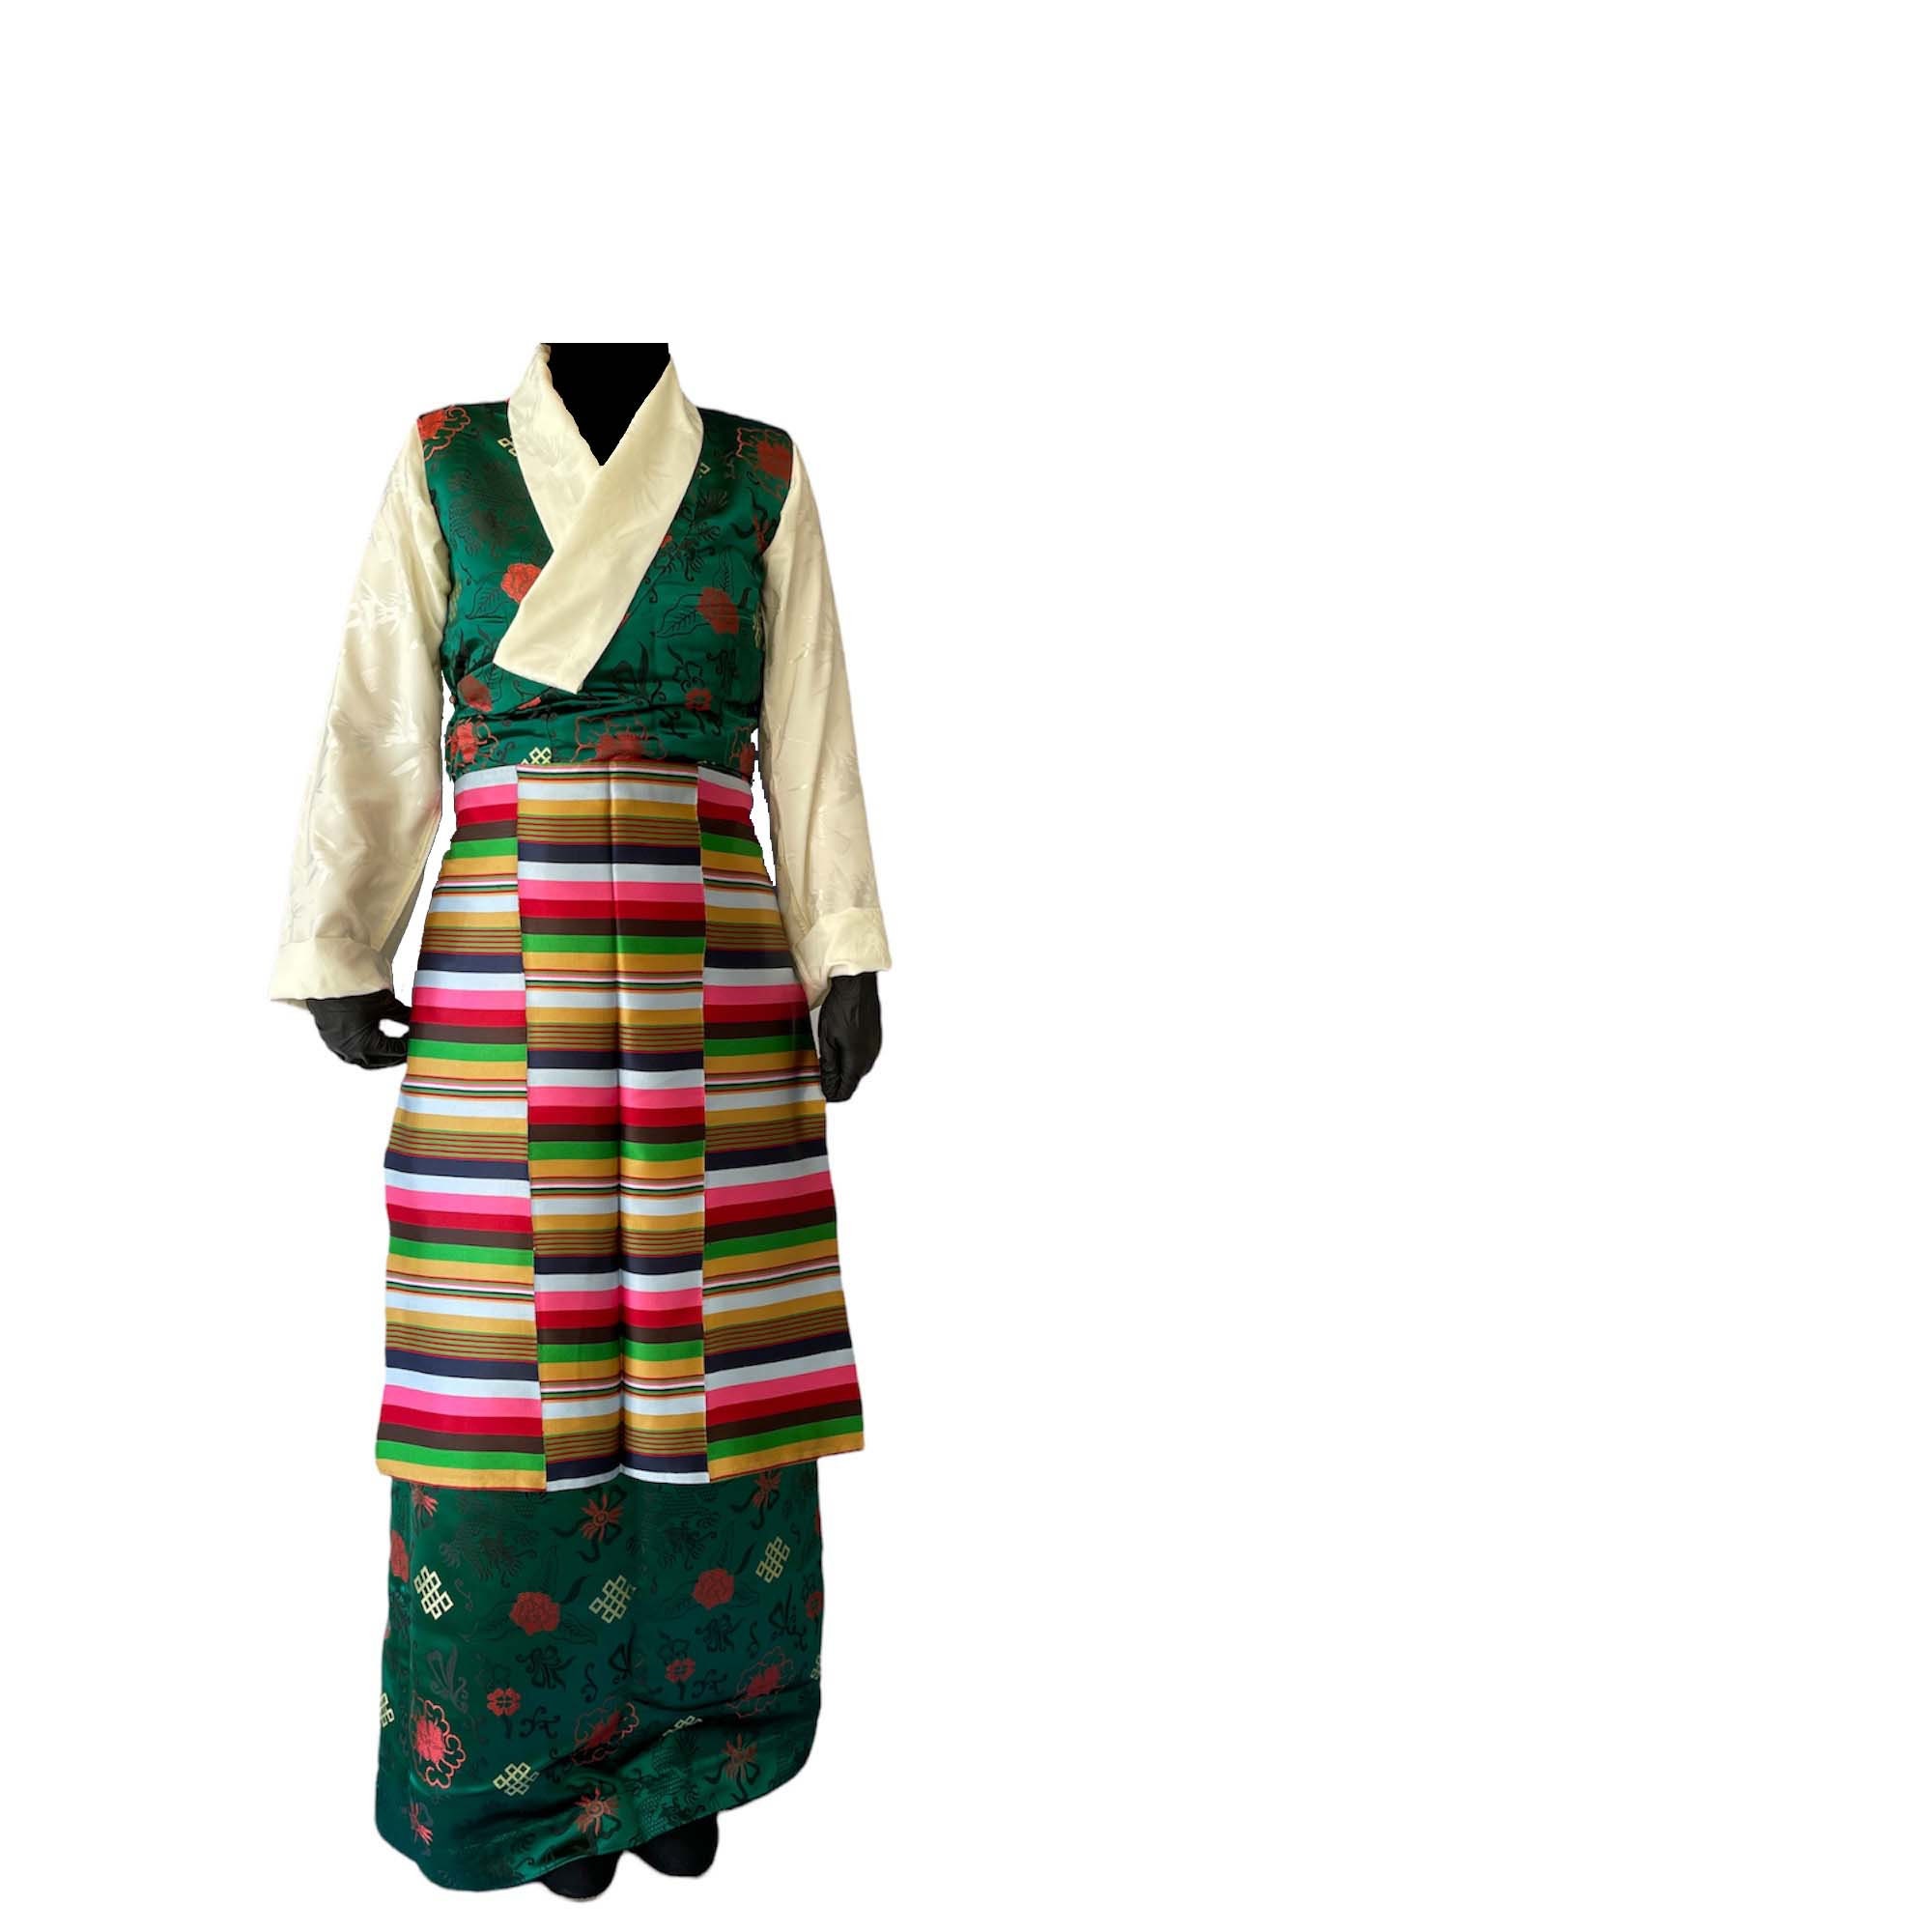 Local style: Traditional costume of Tibet